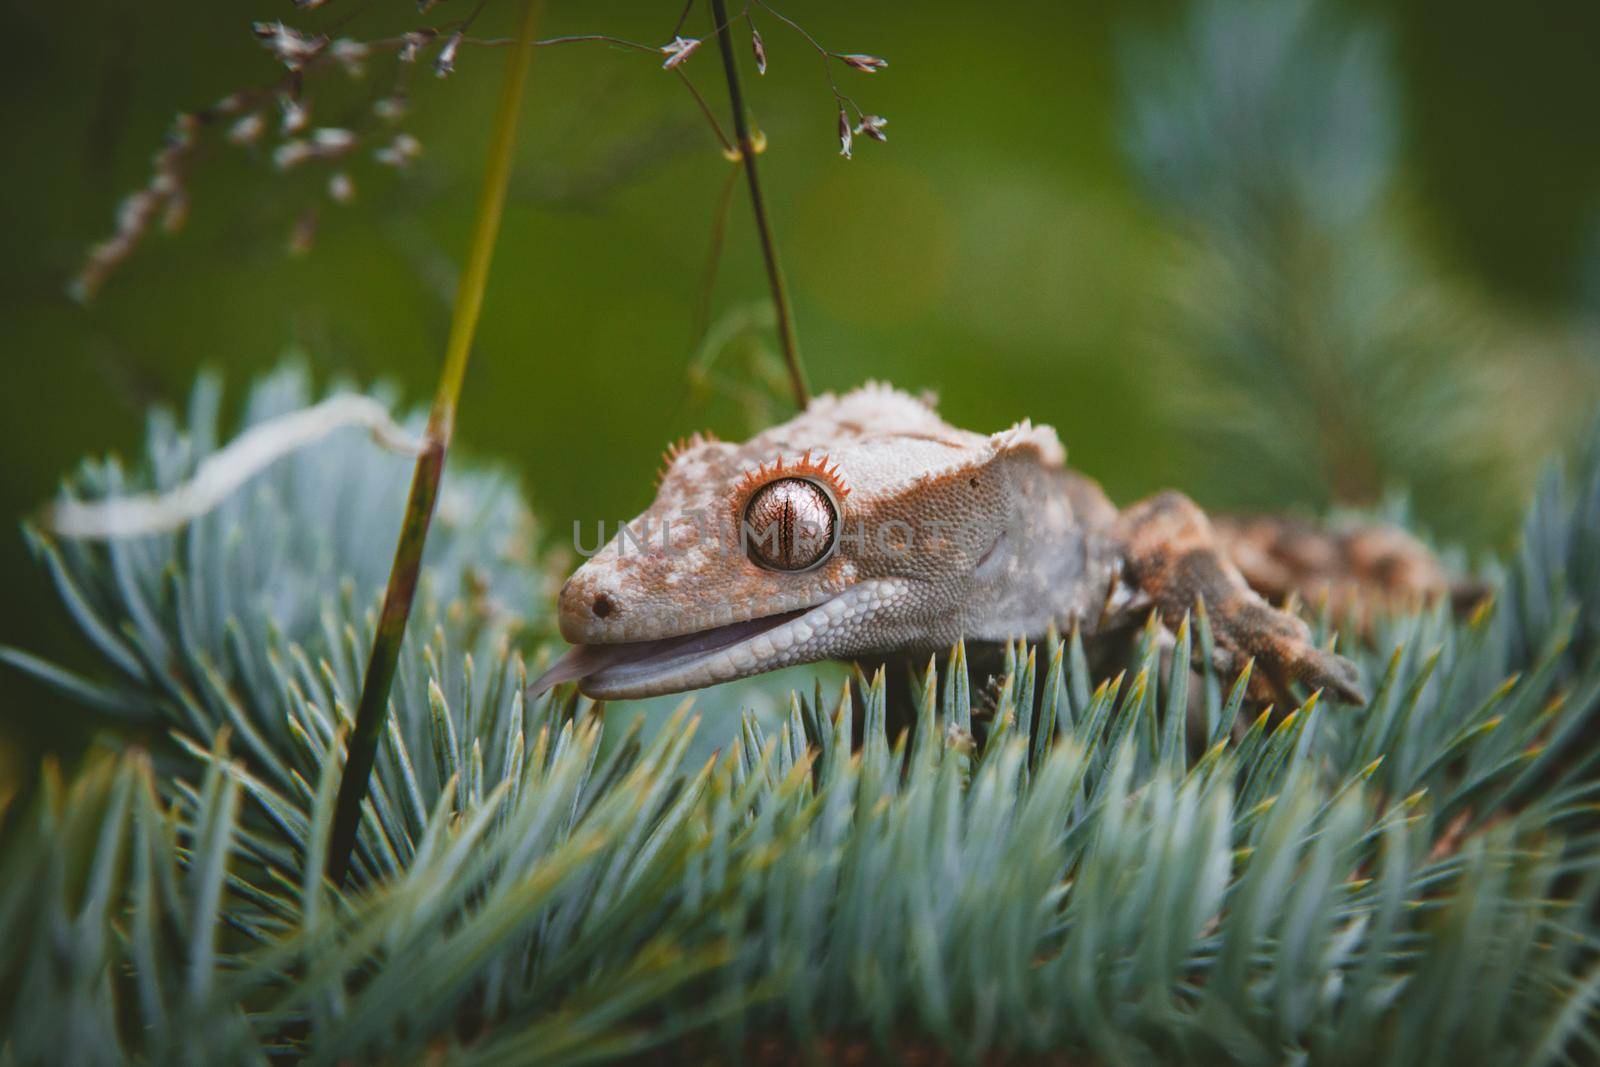 New Caledonian crested gecko sitting on tree by RosaJay